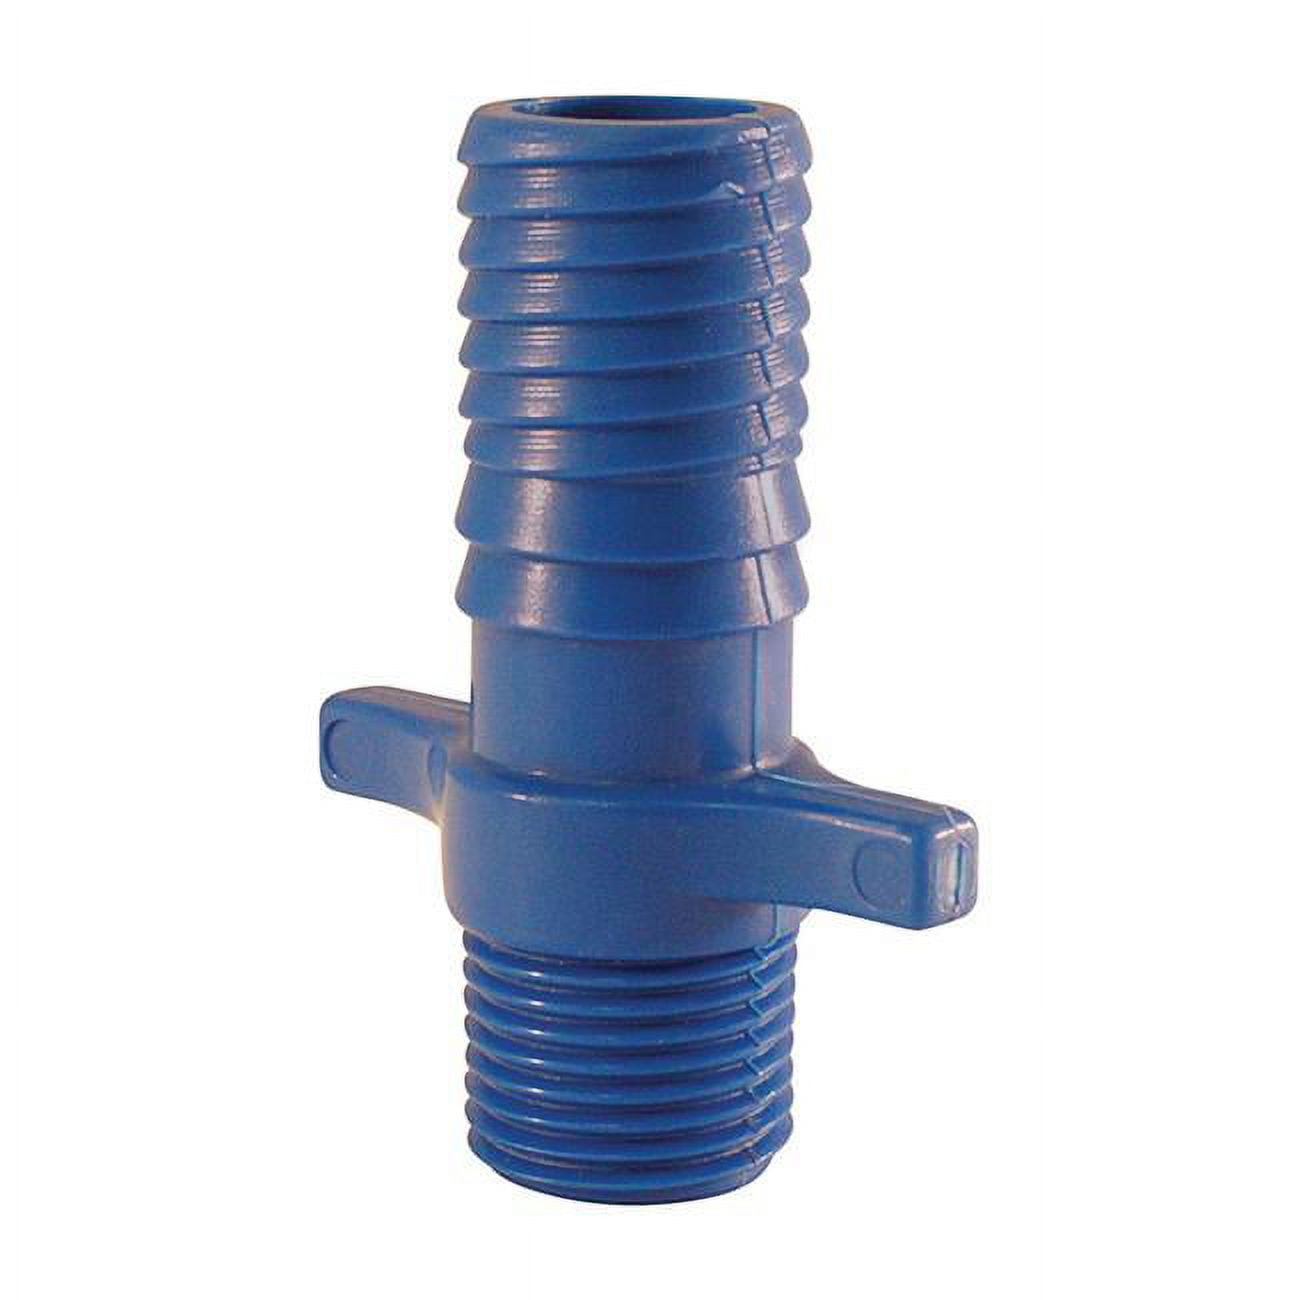 4814539 0.75 In. Mpt X 1 In. Dia. Insert Polypropylene Male Adapter, Blue